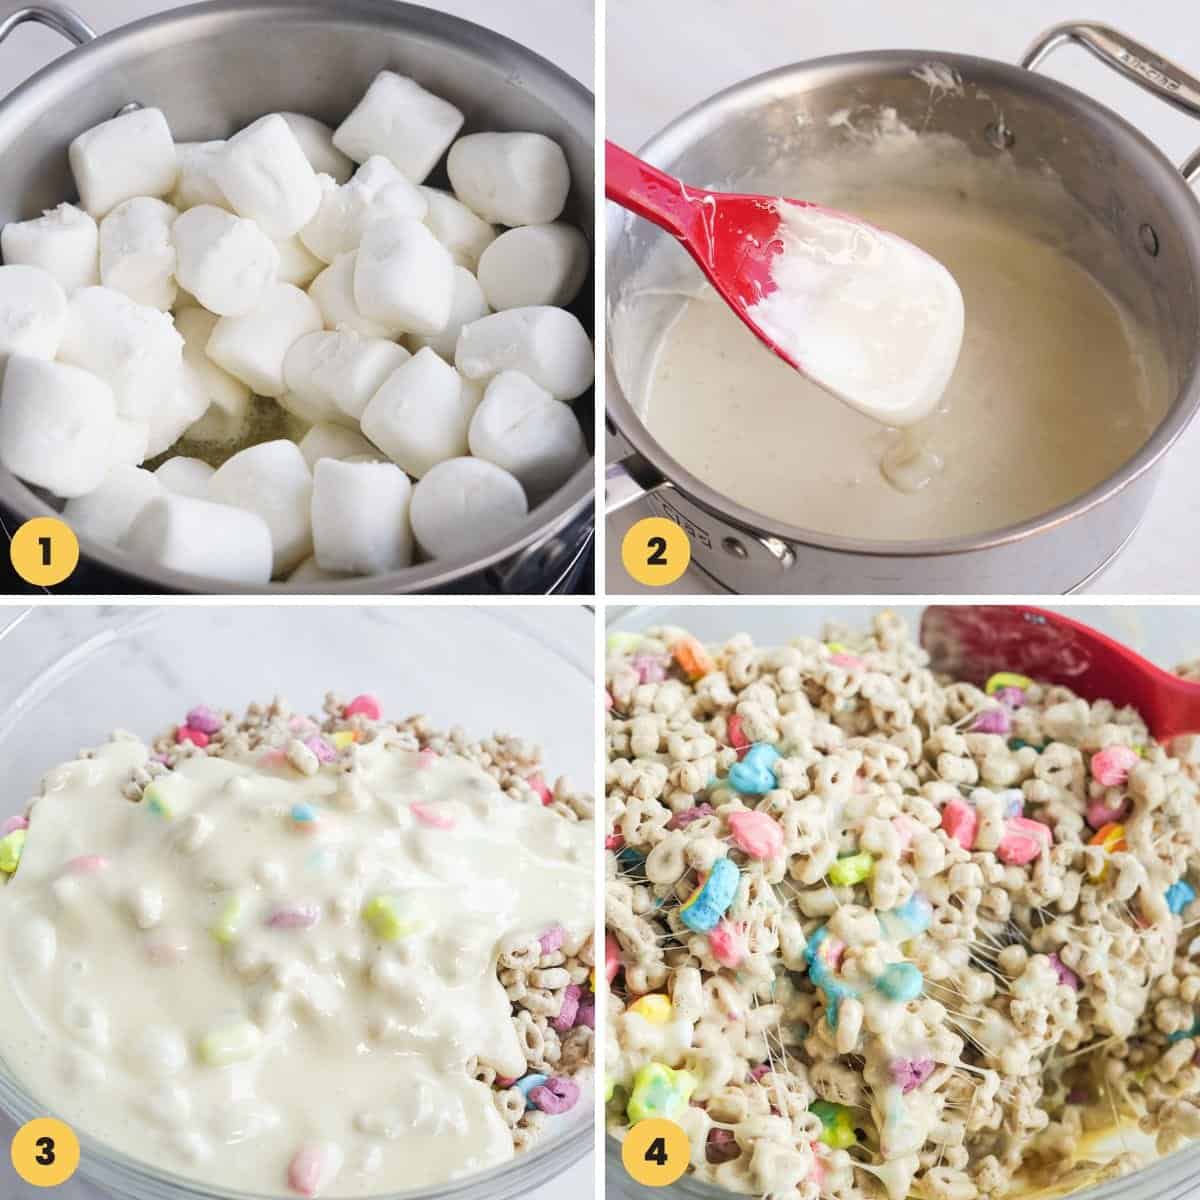 Collage of four images showing how to make lucky charms treats